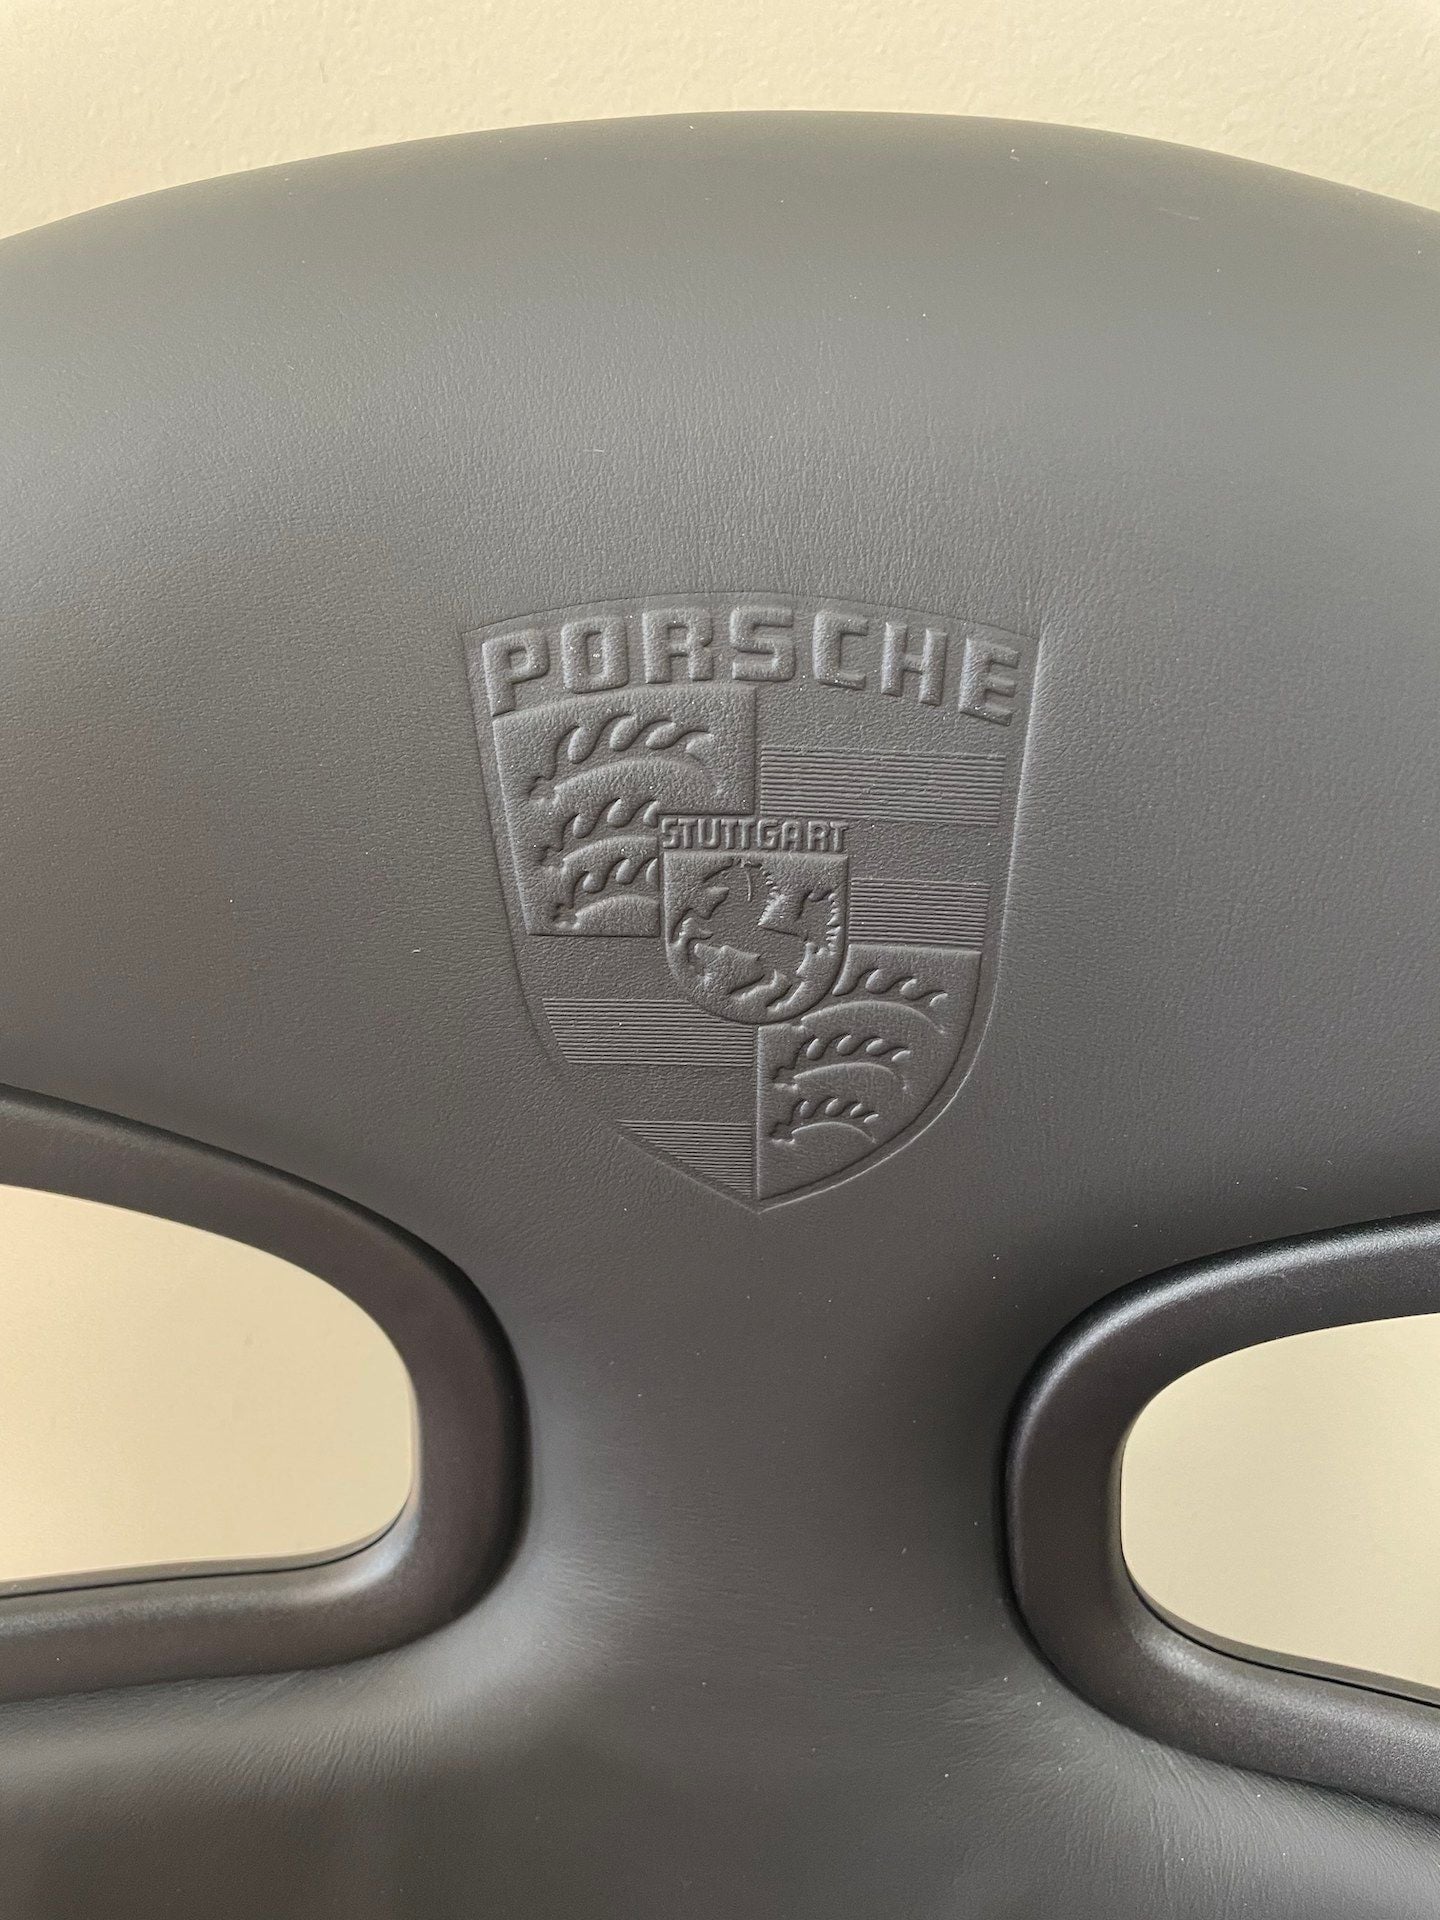 Interior/Upholstery - 996 GT3 / GT2 OEM Euro Recaro Leather Bucket Seats - Used - 1999 to 2005 Porsche GT3 - Mountain View, CA 94040, United States